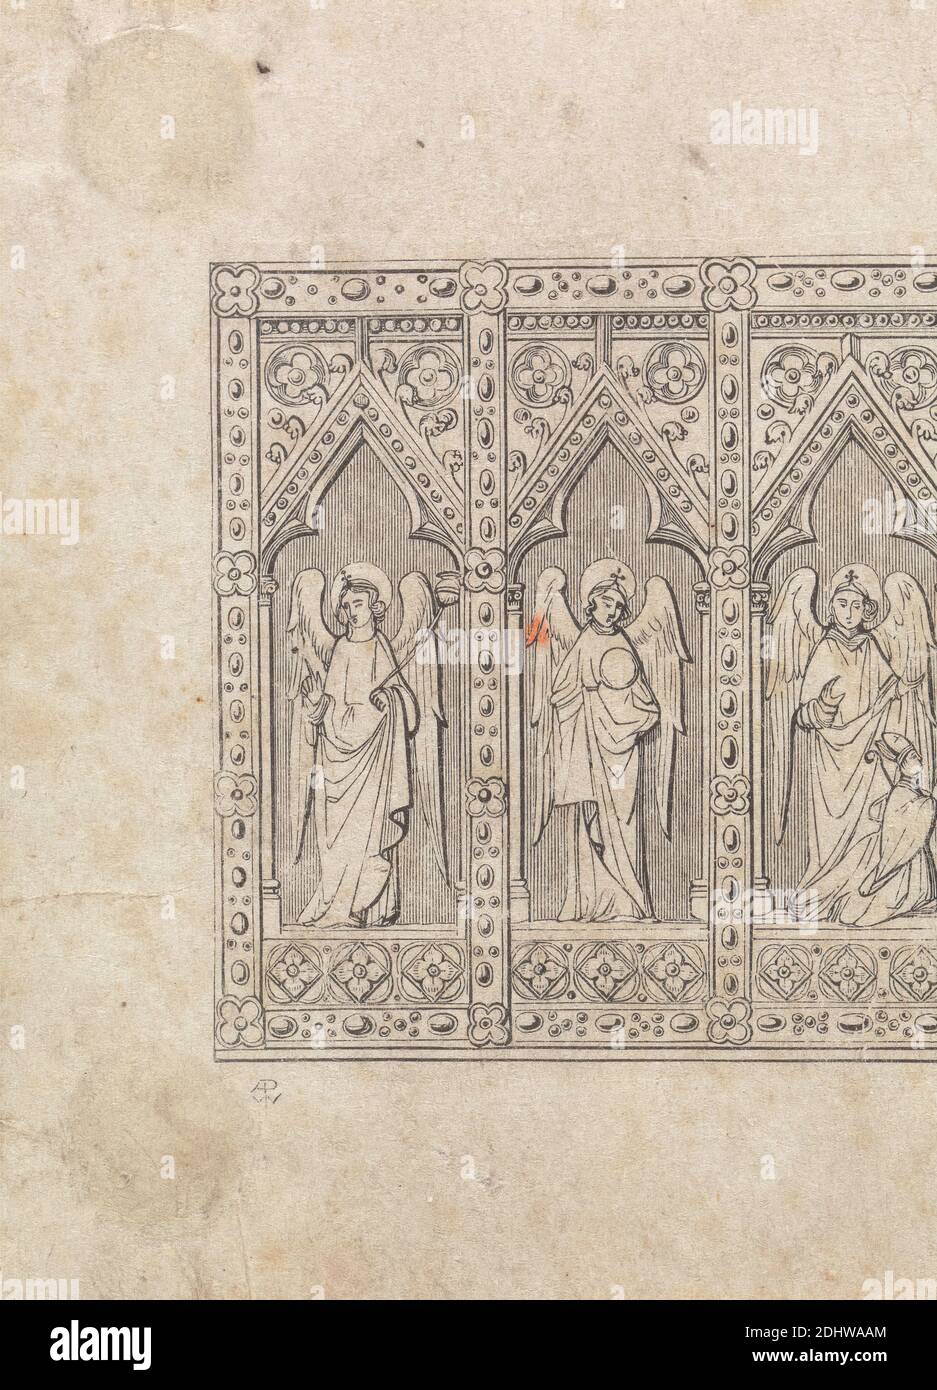 Design for a Gothic Church Altar and Organ, Augustus Welby Northmore Pugin, 1812–1852, British, Augustus Charles Pugin, 1762–1832, French, undated, Pen and black ink on medium, slightly textured, cream wove paper, Sheet: 3 3/8 × 2 1/2 inches (8.6 × 6.4 cm), altars, angels, architectural subject, church, designs, Gothic (Medieval), organ (aerophone), saints Stock Photo